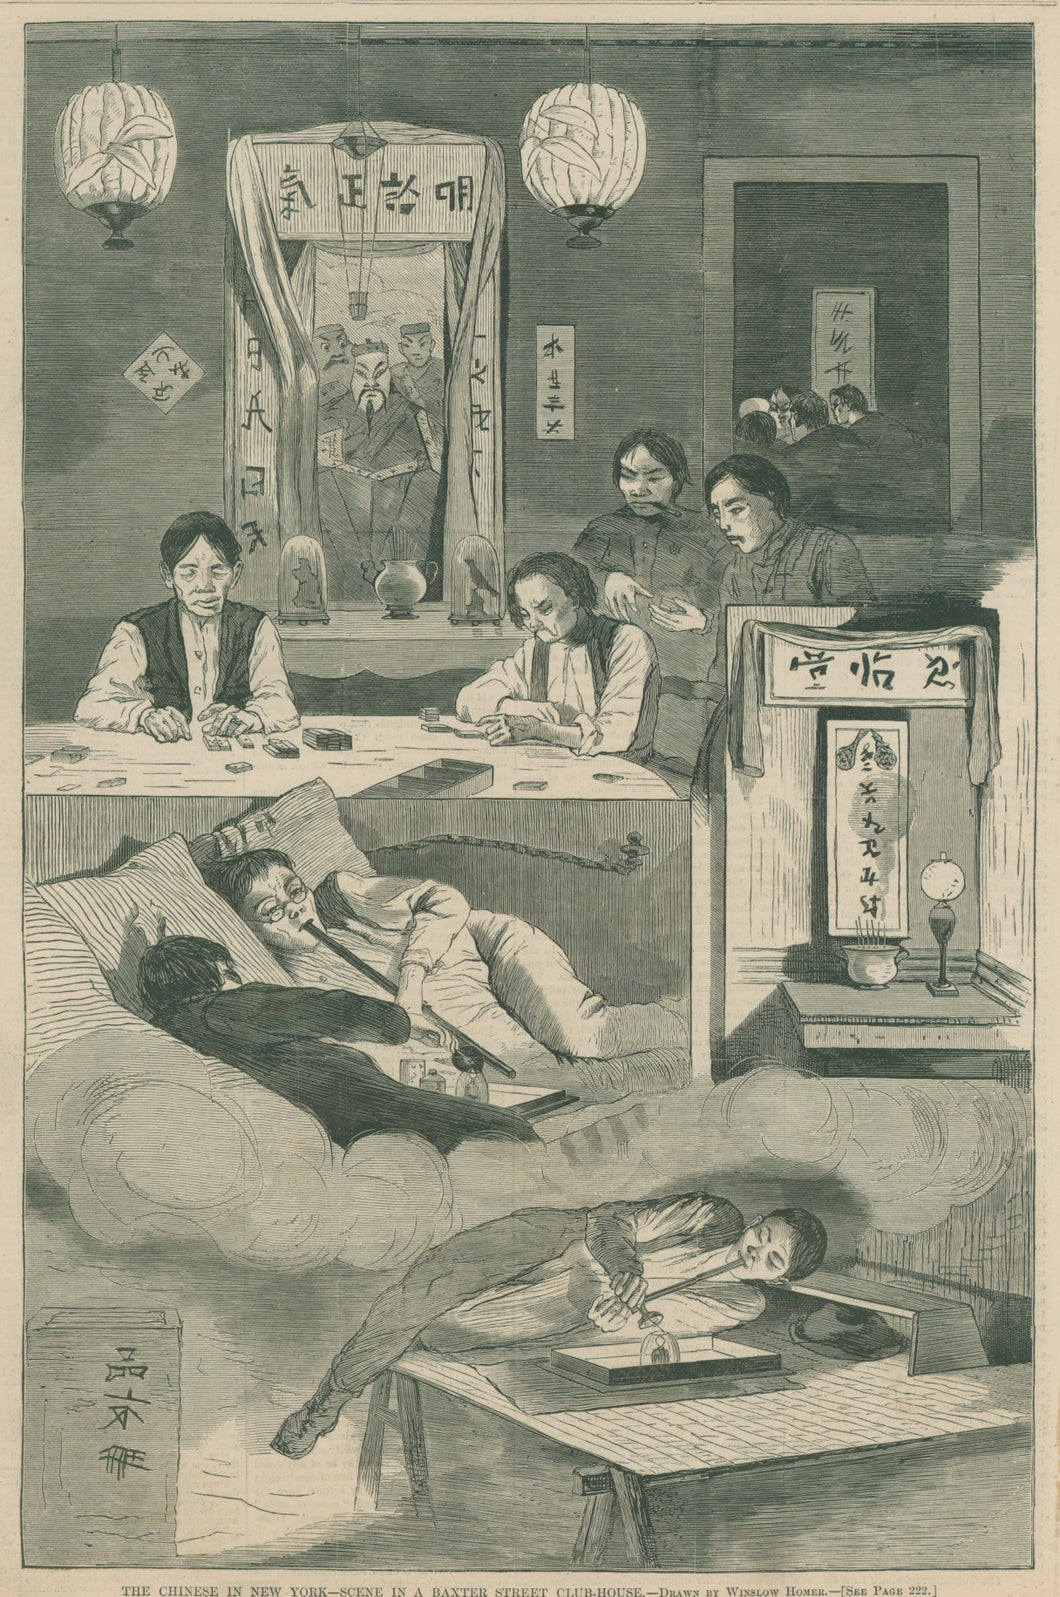 Homer, Winslow “The Chinese in New York--Scene in a Baxter Street Club-House”